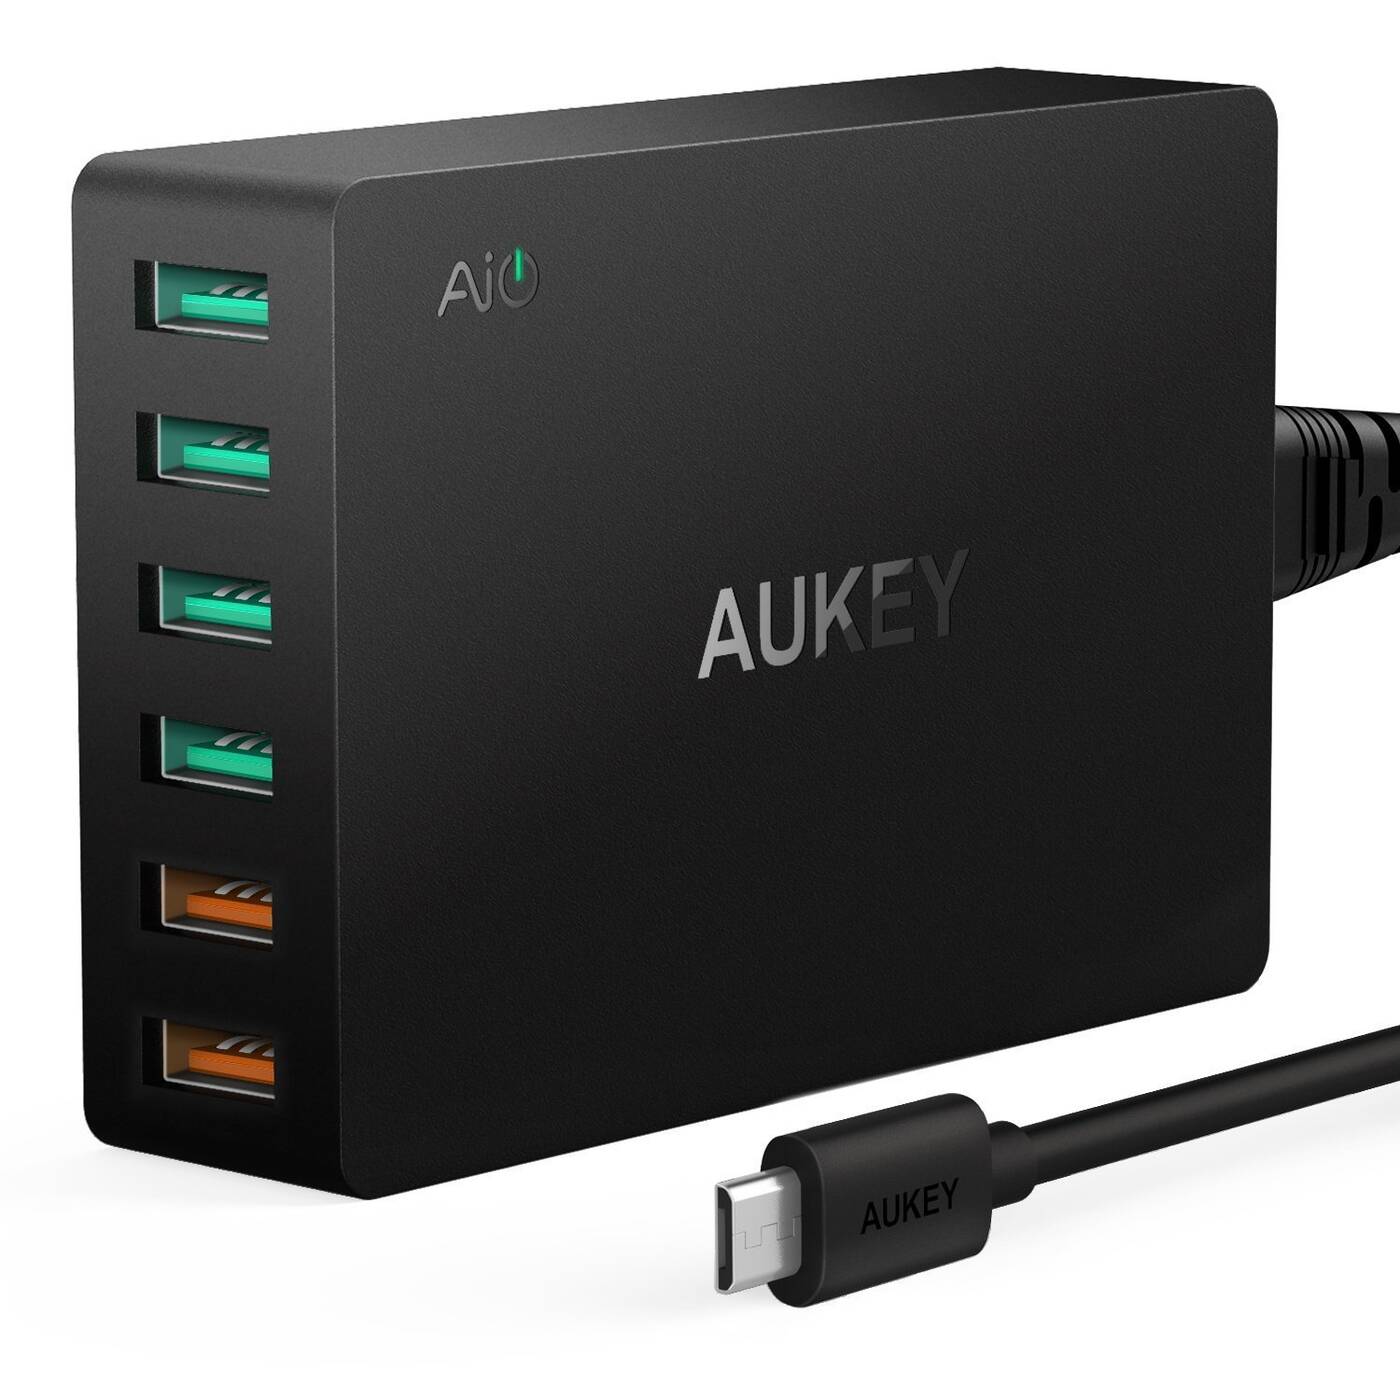 test Aukey PA-T11, recenzja Aukey PA-T11, review Aukey PA-T11, opinia Aukey PA-T11, czy warto Aukey PA-T11, cena Aukey PA-T11, wydajność Aukey PA-T11, ładowarka Aukey PA-T11